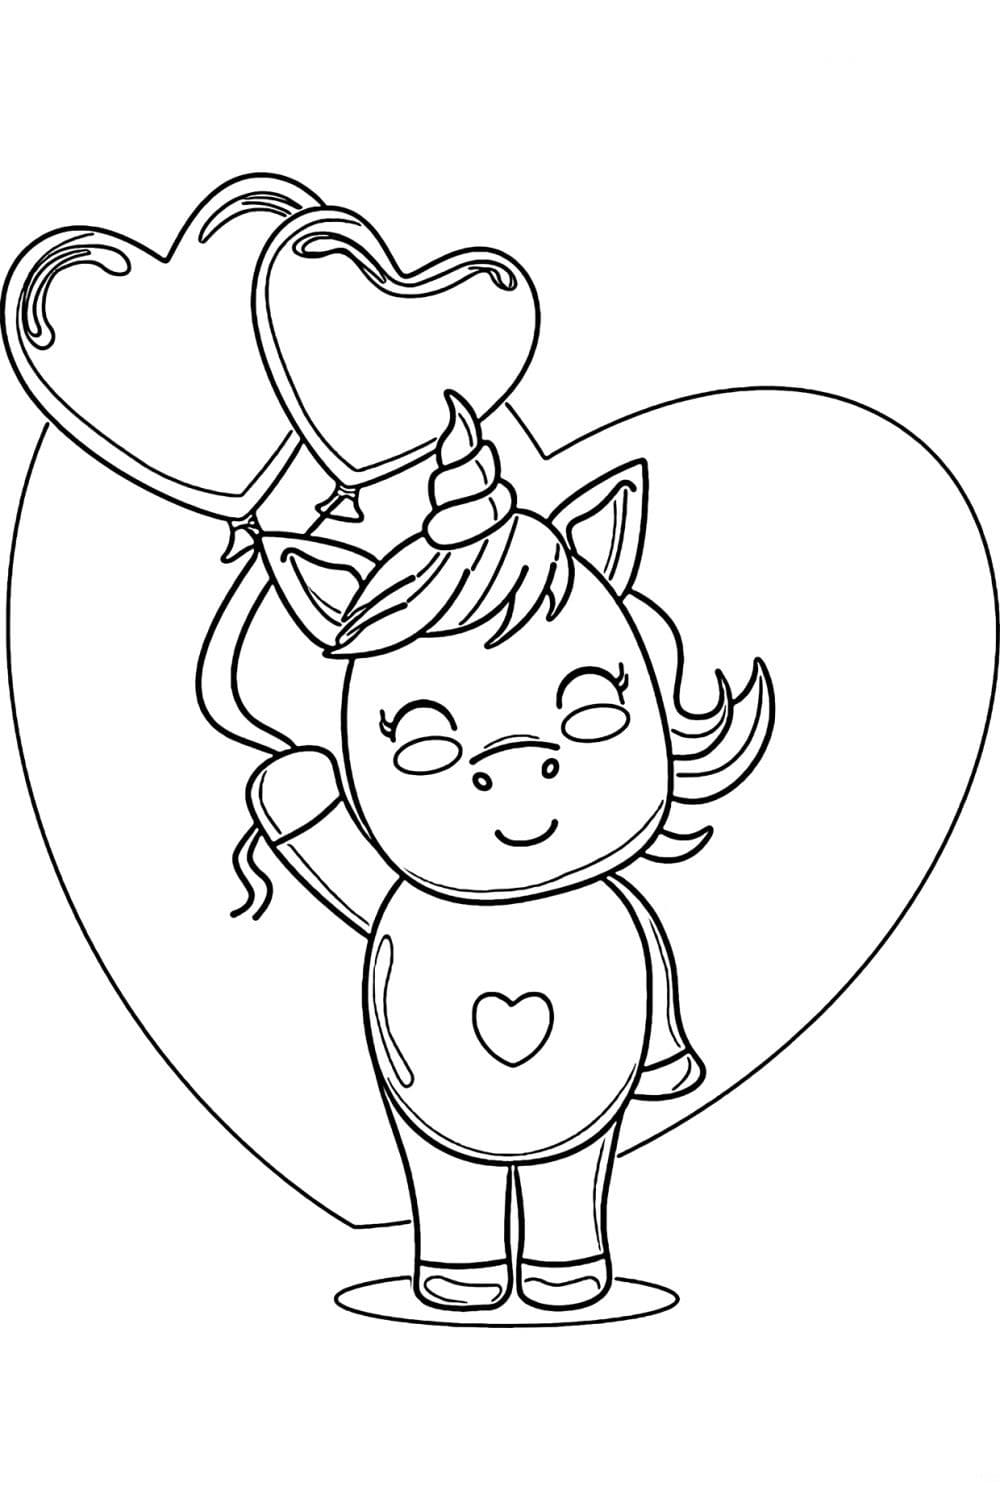 Coloring page Valentine's Day Unicorn wishes Happy Valentine's Day